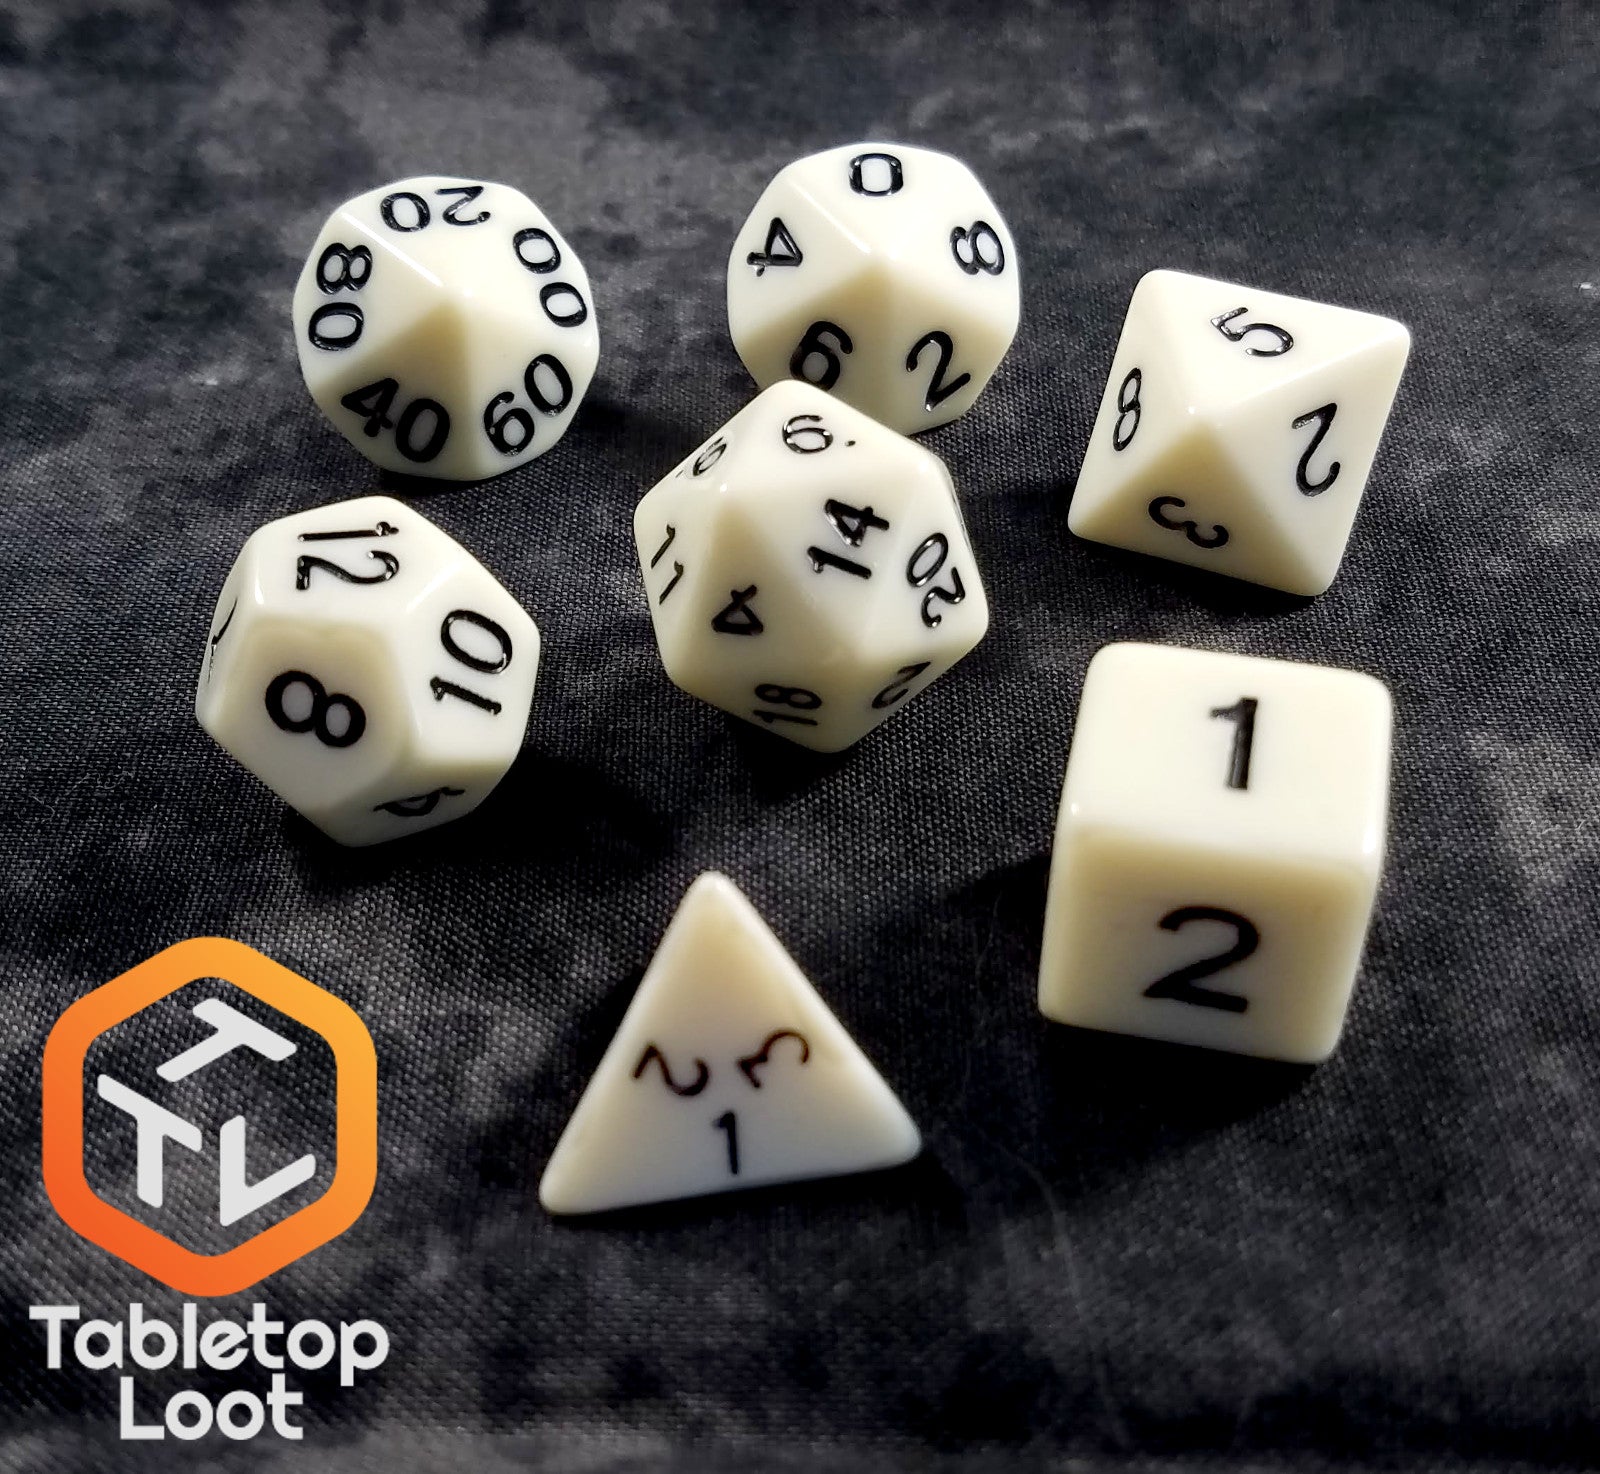 The Bleached Bone 7 piece dice set from Tabletop Loot with matte white resin and black numbering.